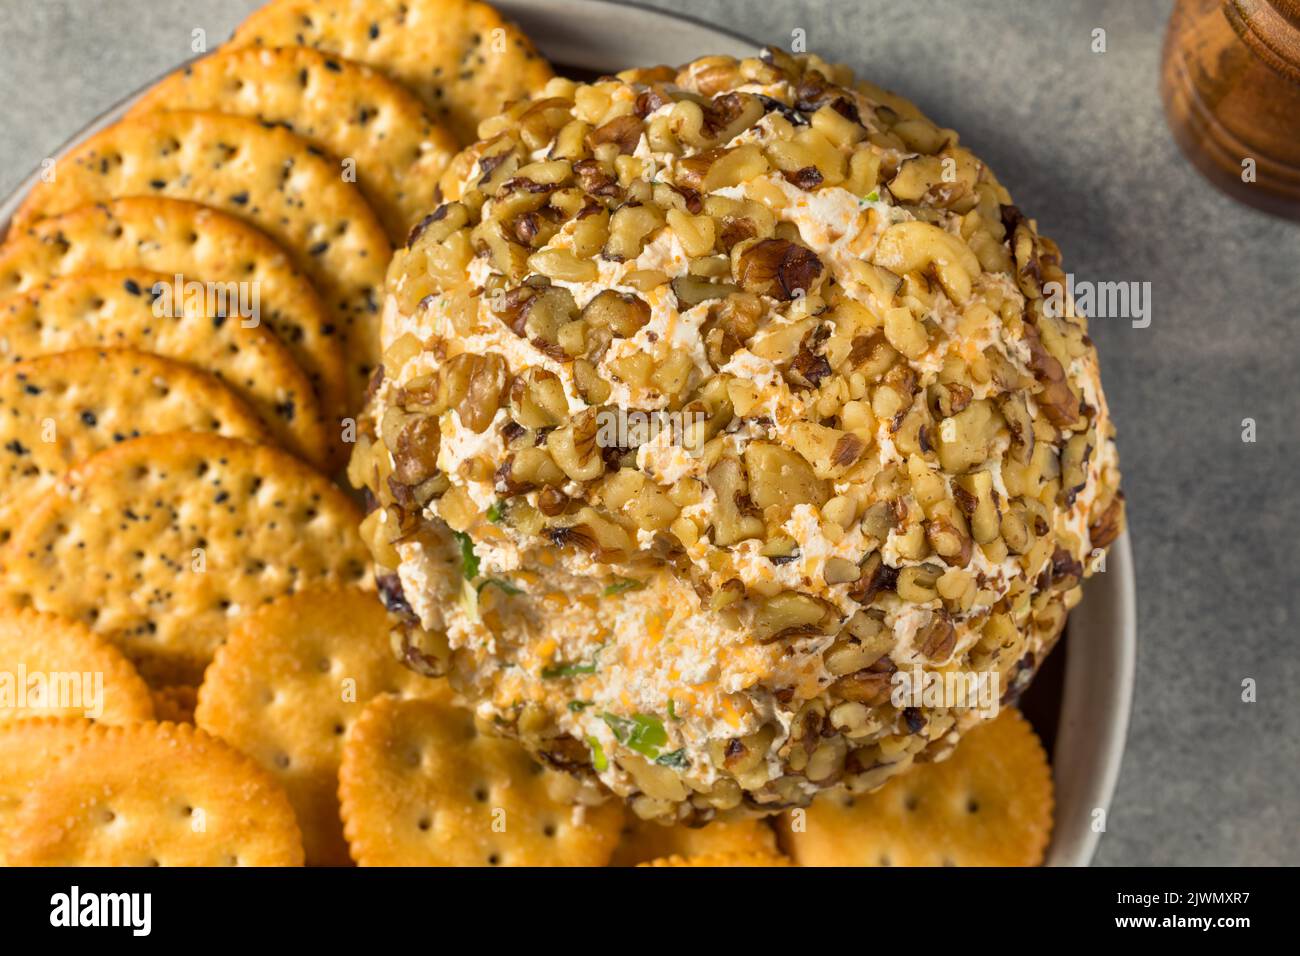 Chick Cheese Ball, Cheese Ball, Cucumber Slices, Crackers, Olive, Carrots,  HD wallpaper